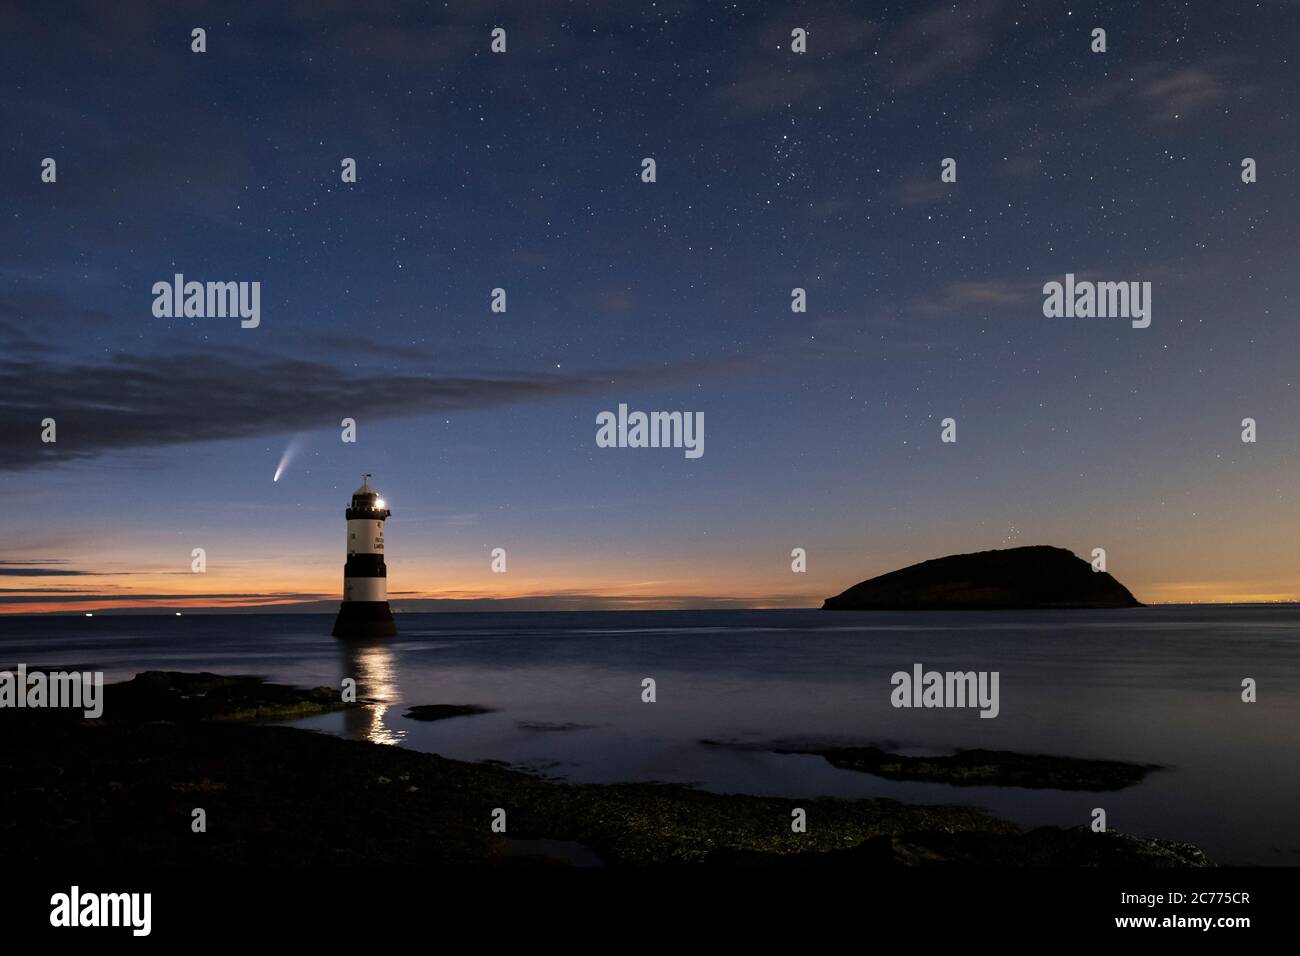 Comet NEOWISE and The Night Sky above Trwyn Du Lighthouse and Puffin Island, Penmon, Anglesey, North Wales, UK Stock Photo